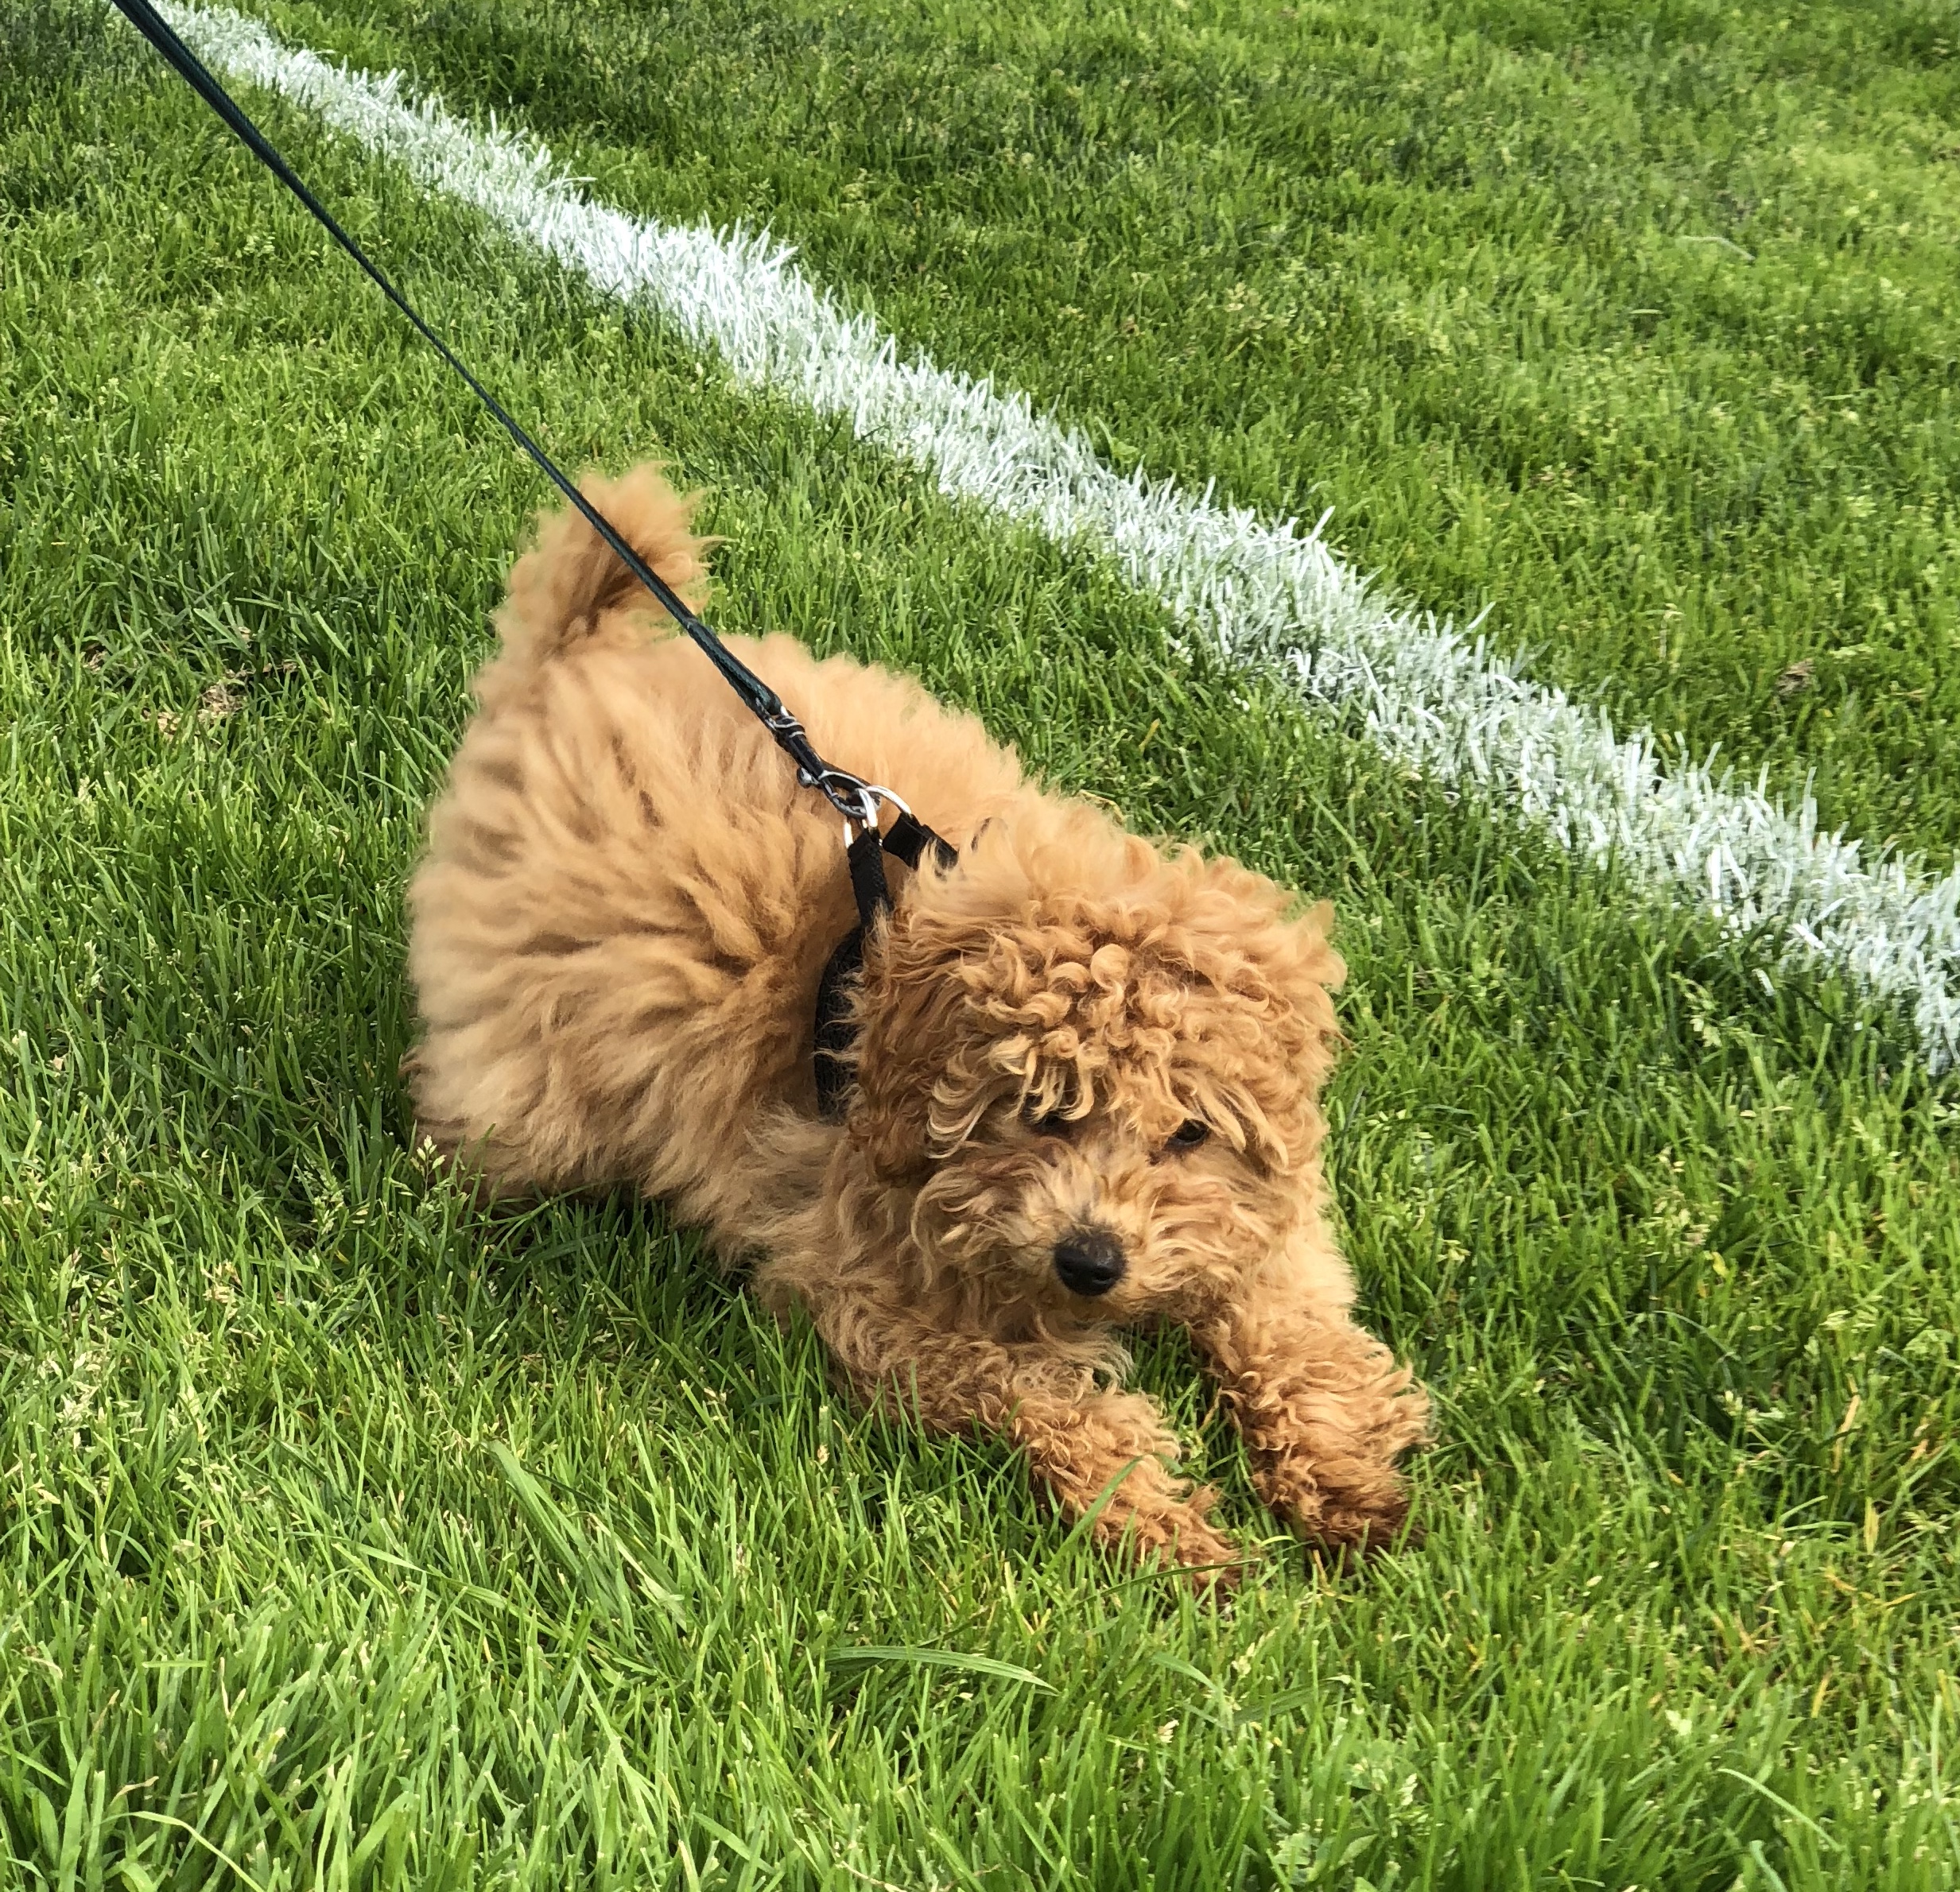 Sixteen-Week-Old Apricot Poodle Puppy Running In The Grass